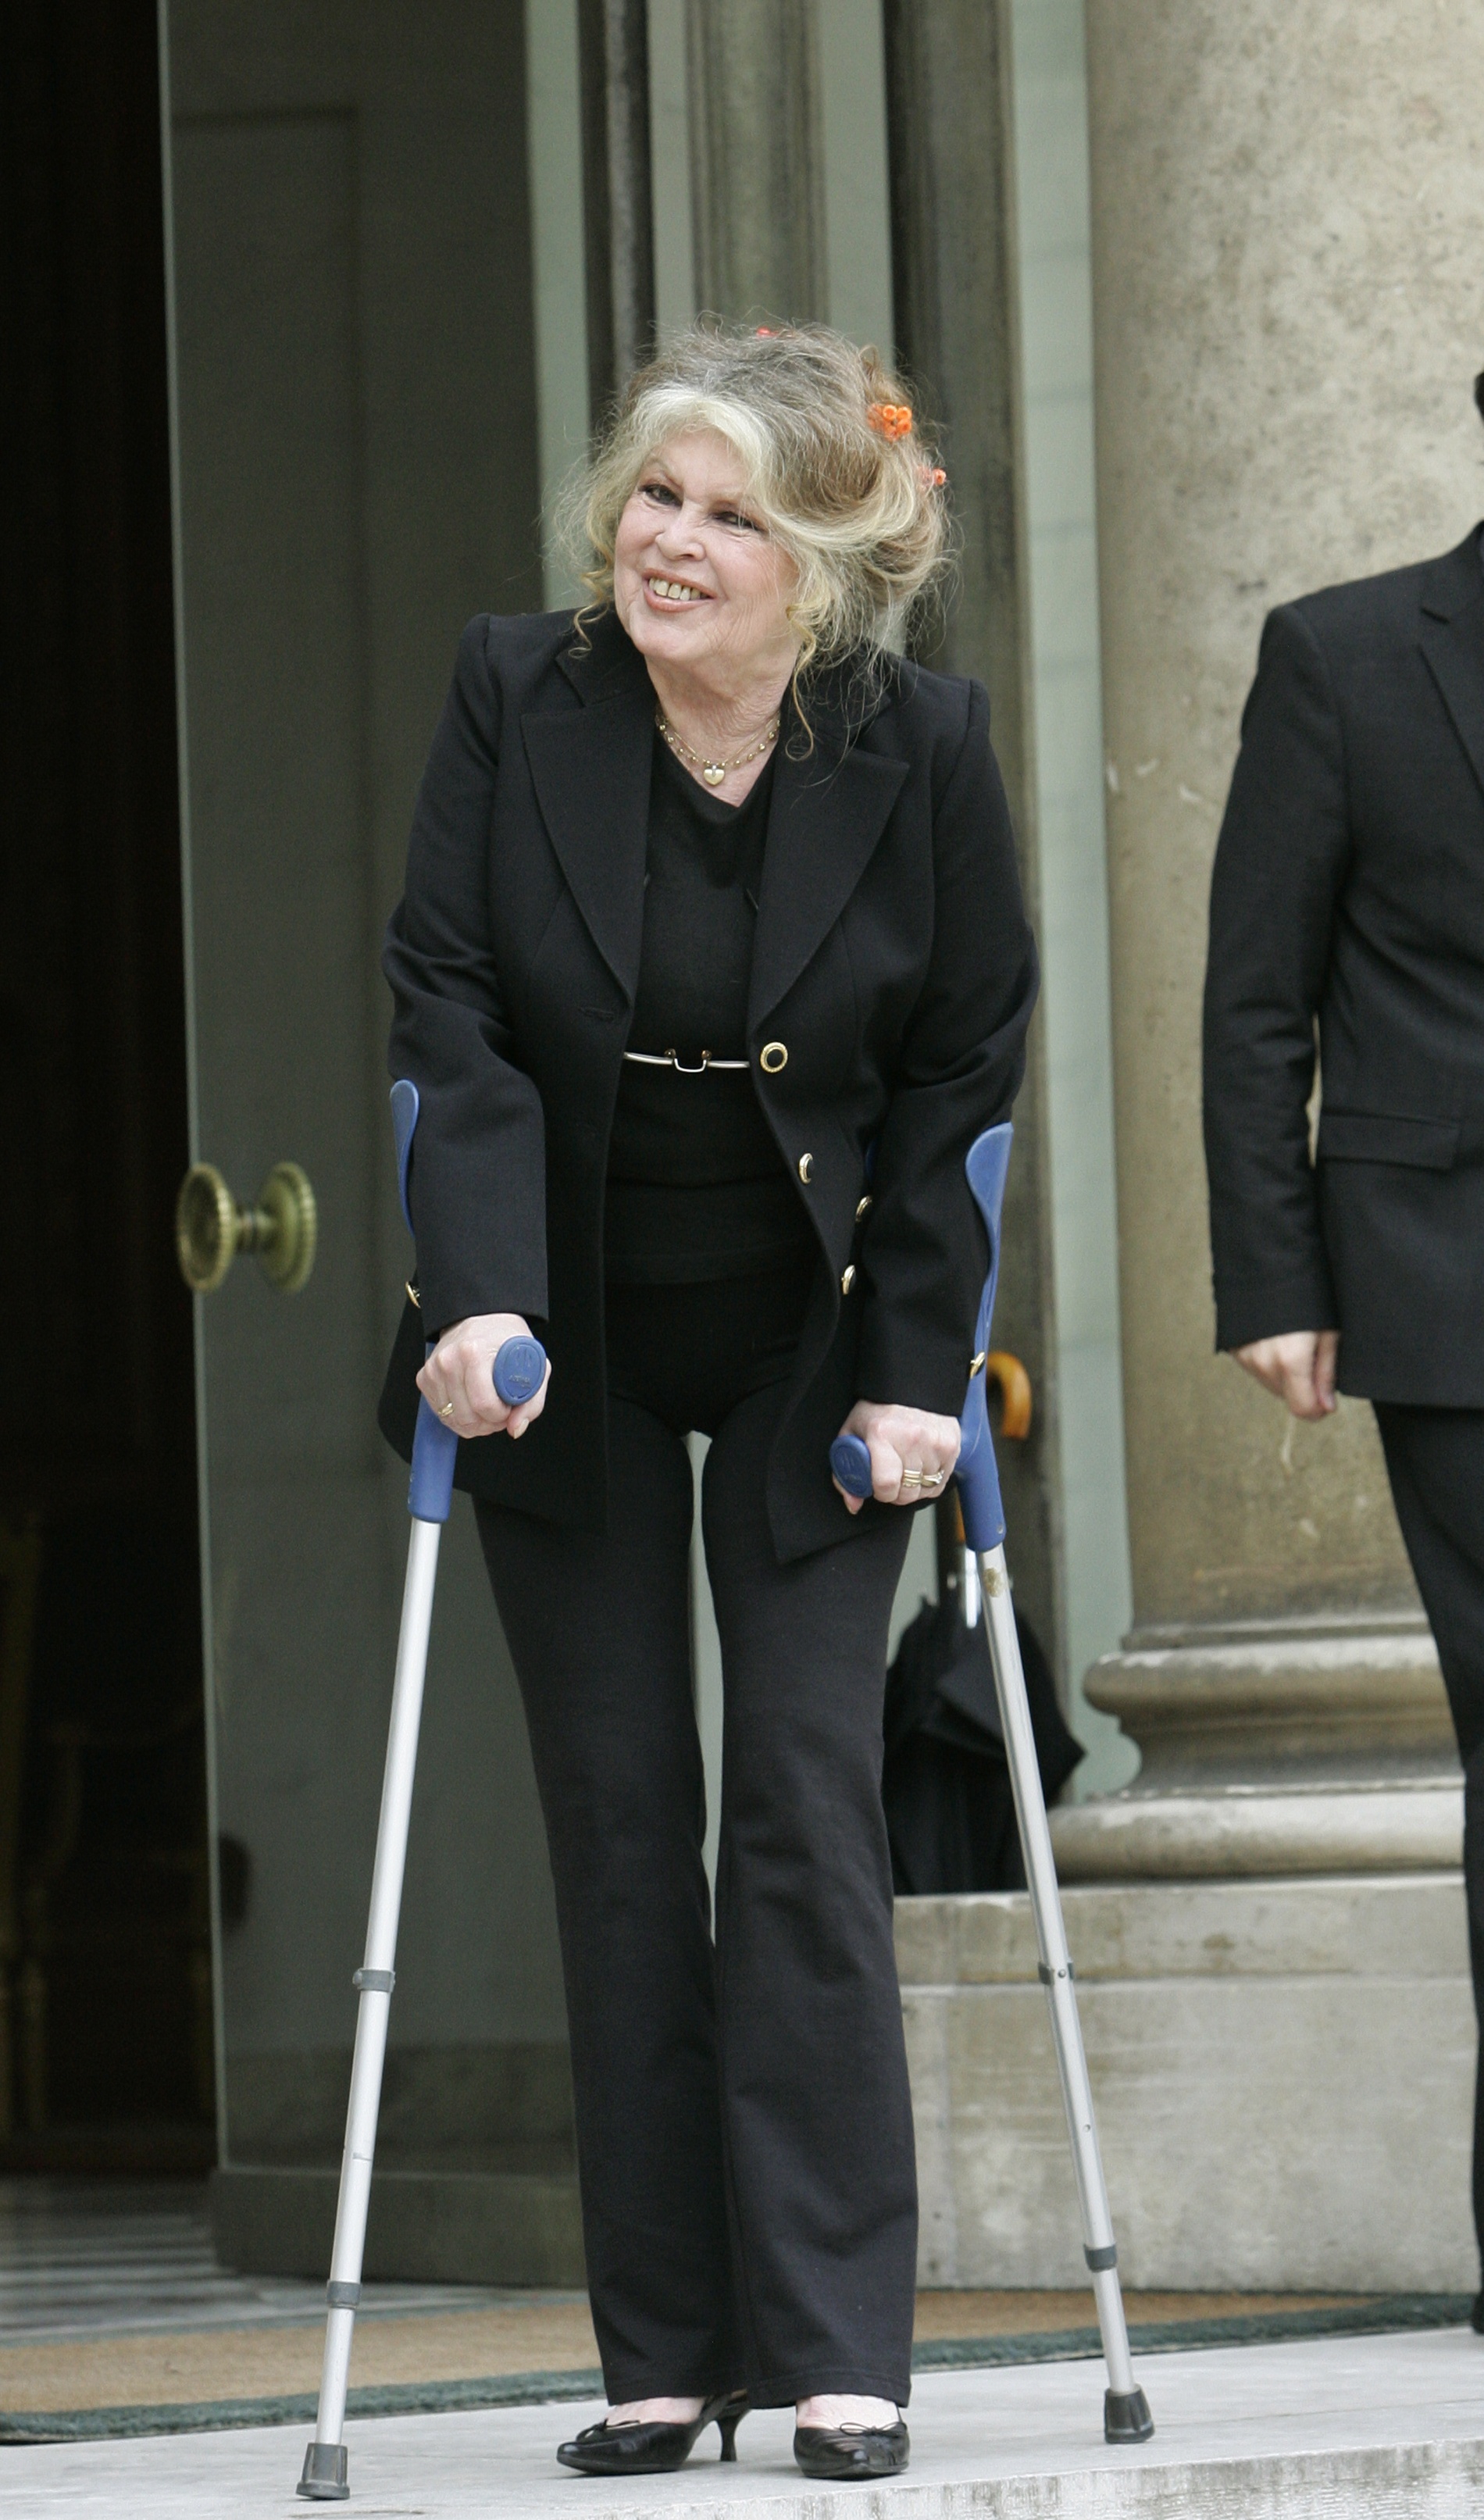 Brigitte Bardot at the Elysee palace after a meeting with French President Nicolas Sarkozy on September 27, 2007, in Paris, France. | Source: Getty Images